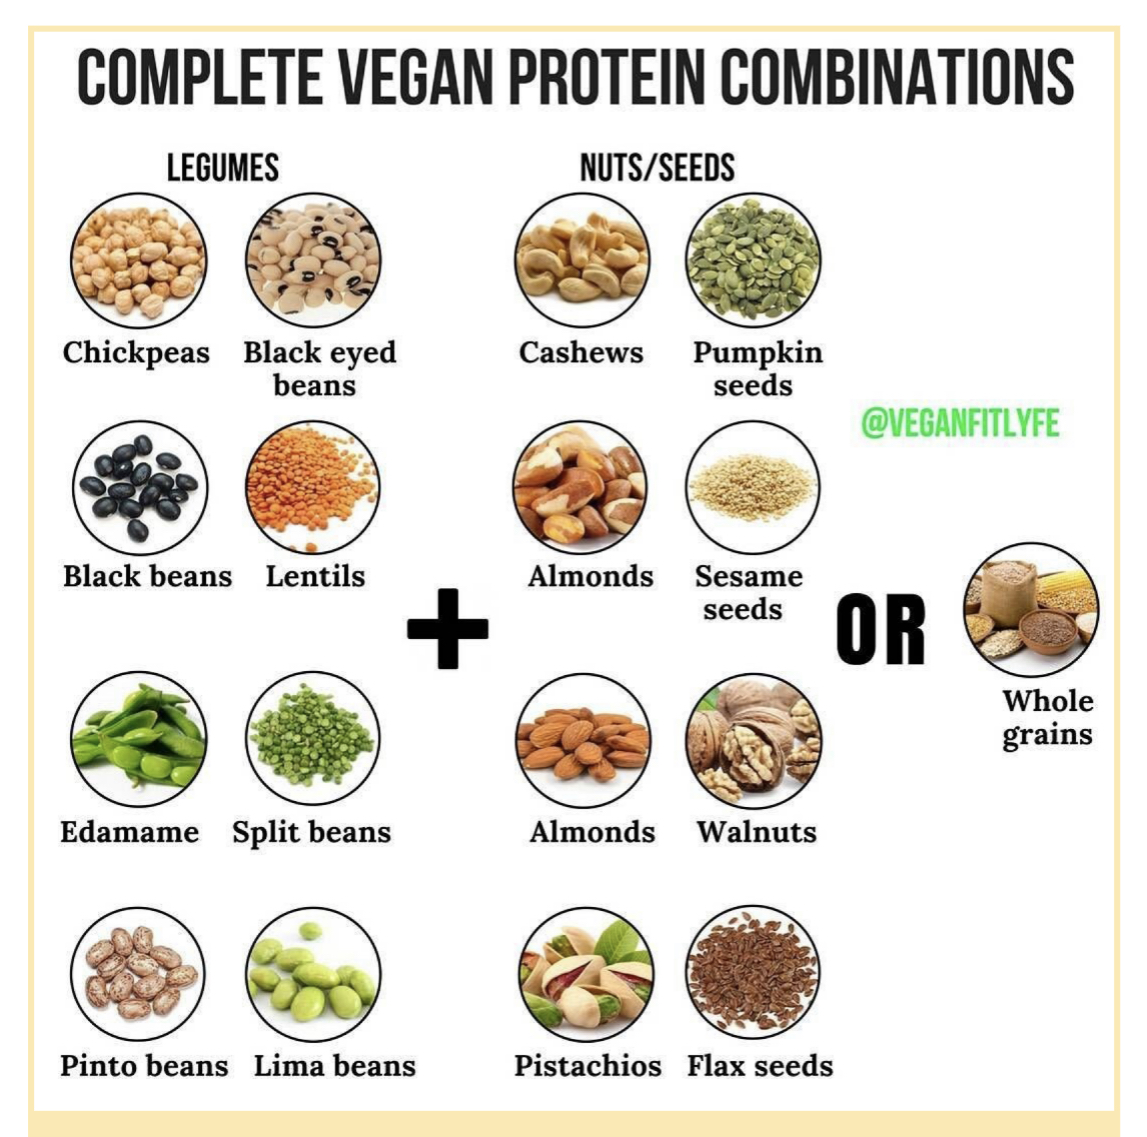 What’s All the Buzz About Plant Protein?